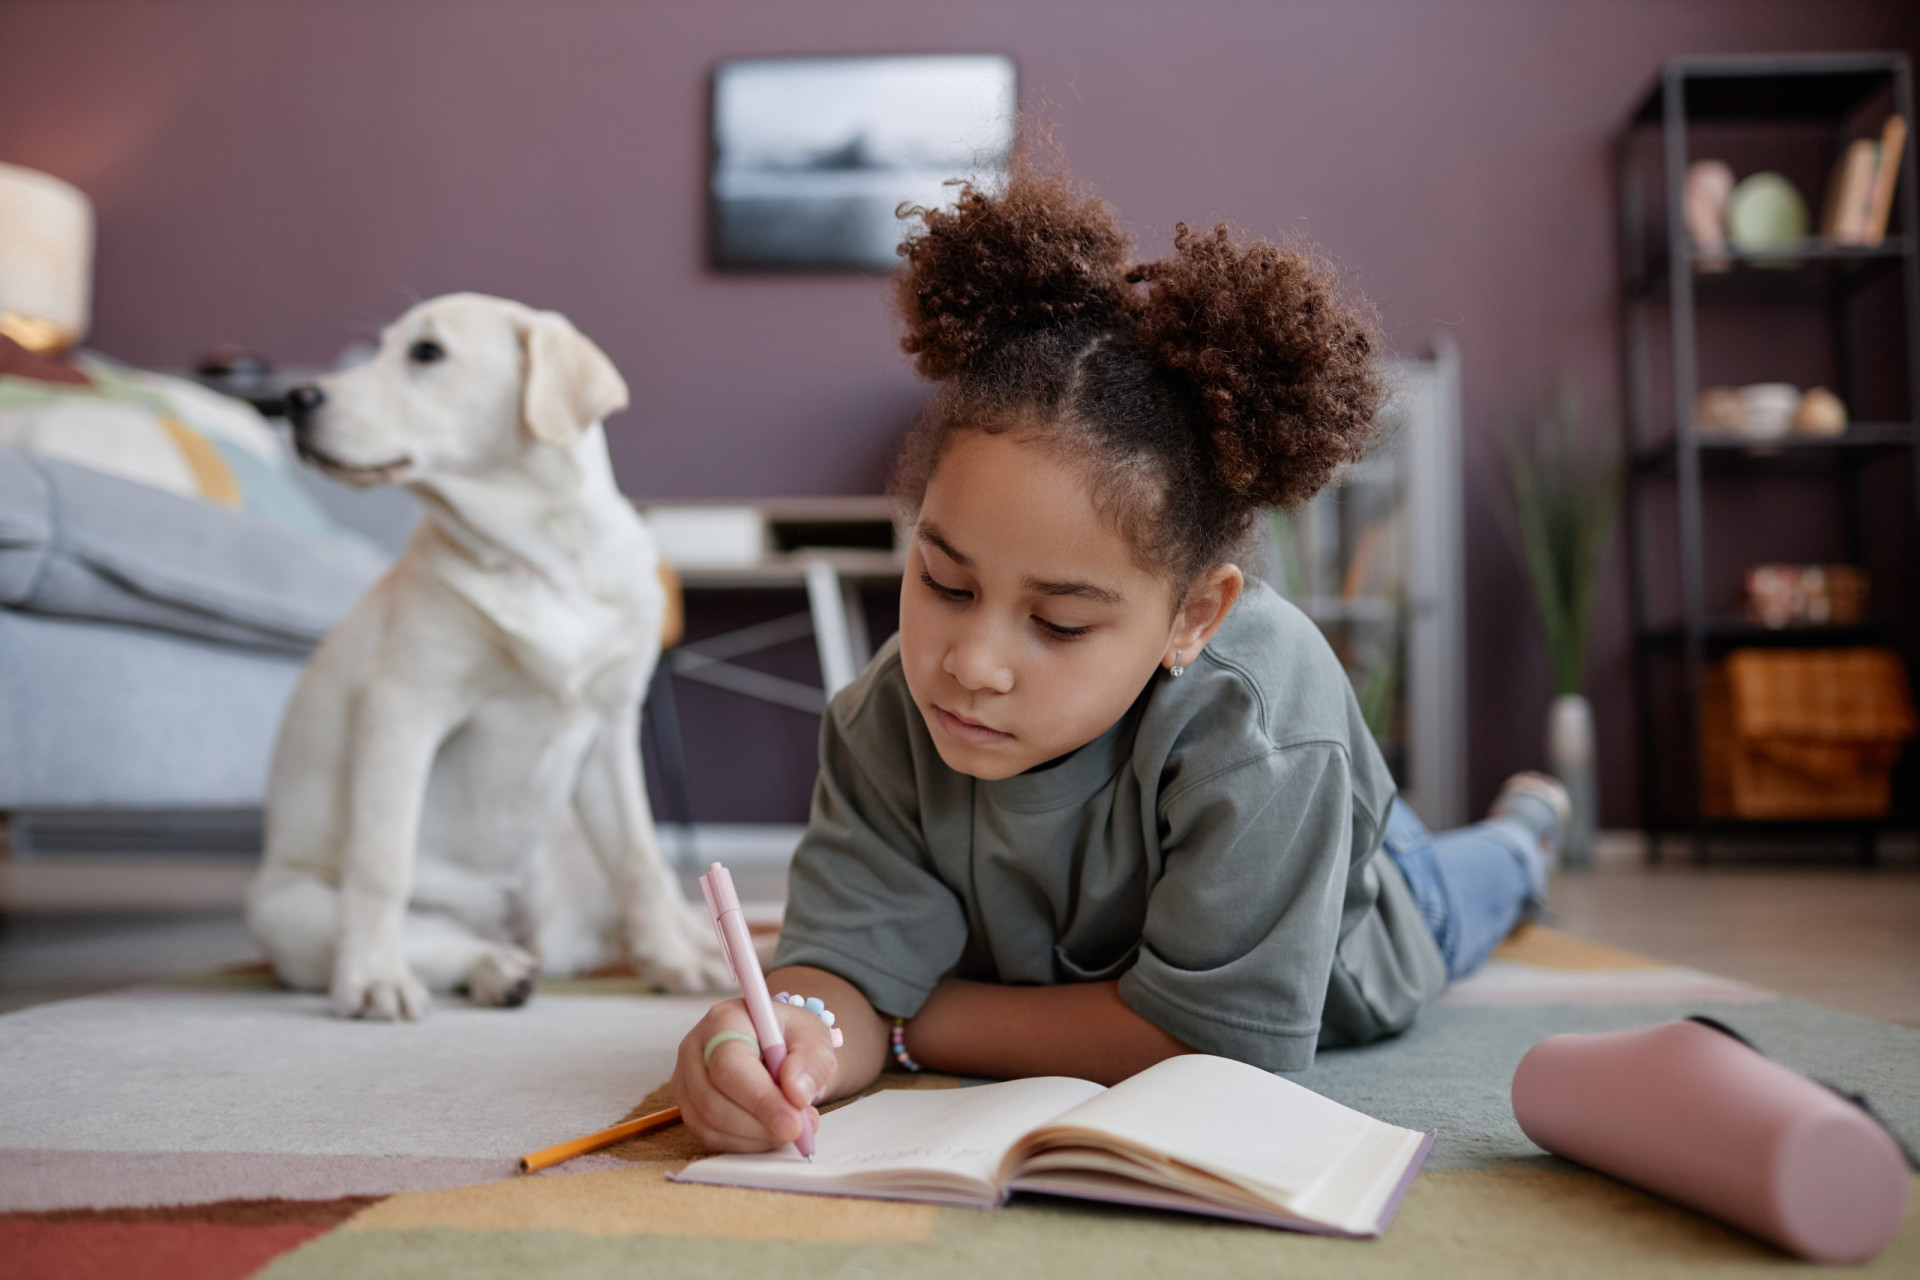 <p>Encouraging kids to keep gratitude journals helps them count their blessings. It's a daily reminder to appreciate the good things in life and express thanks.</p><p>You may also like:<a href="https://www.starsinsider.com/n/182220?utm_source=msn.com&utm_medium=display&utm_campaign=referral_description&utm_content=588009en-en"> The Empire State Building: beautiful pics and interesting facts</a></p>